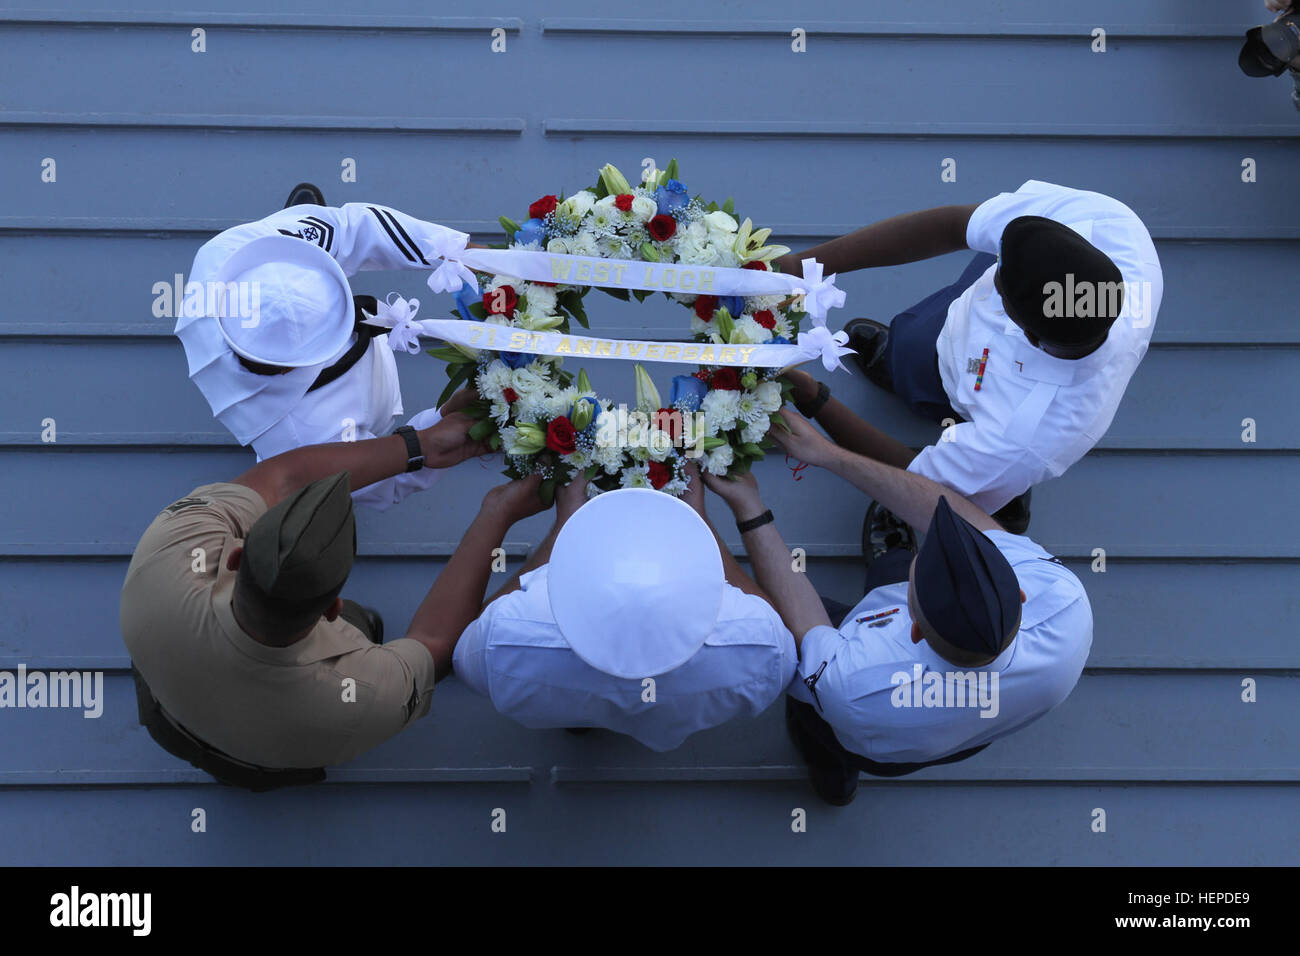 The youngest service member from each of the five U.S. military branches carried a memorial wreath down the ramp of U.S. Army Vessel Lt. Gen. William B. Bunker (Logistic Support Vessel 4) during the 71st West Loch Disaster Remembrance Ceremony to the waters of West Loch as a sign of respect and remembrance at Joint Base Pearl Harbor-Hickam, May 21, 2015. This was the second largest tragedy in Pearl Harbor during WWII. Hawaii community, service members memorialize those lost at West Loch 150521-A-ZZ999-001 Stock Photo